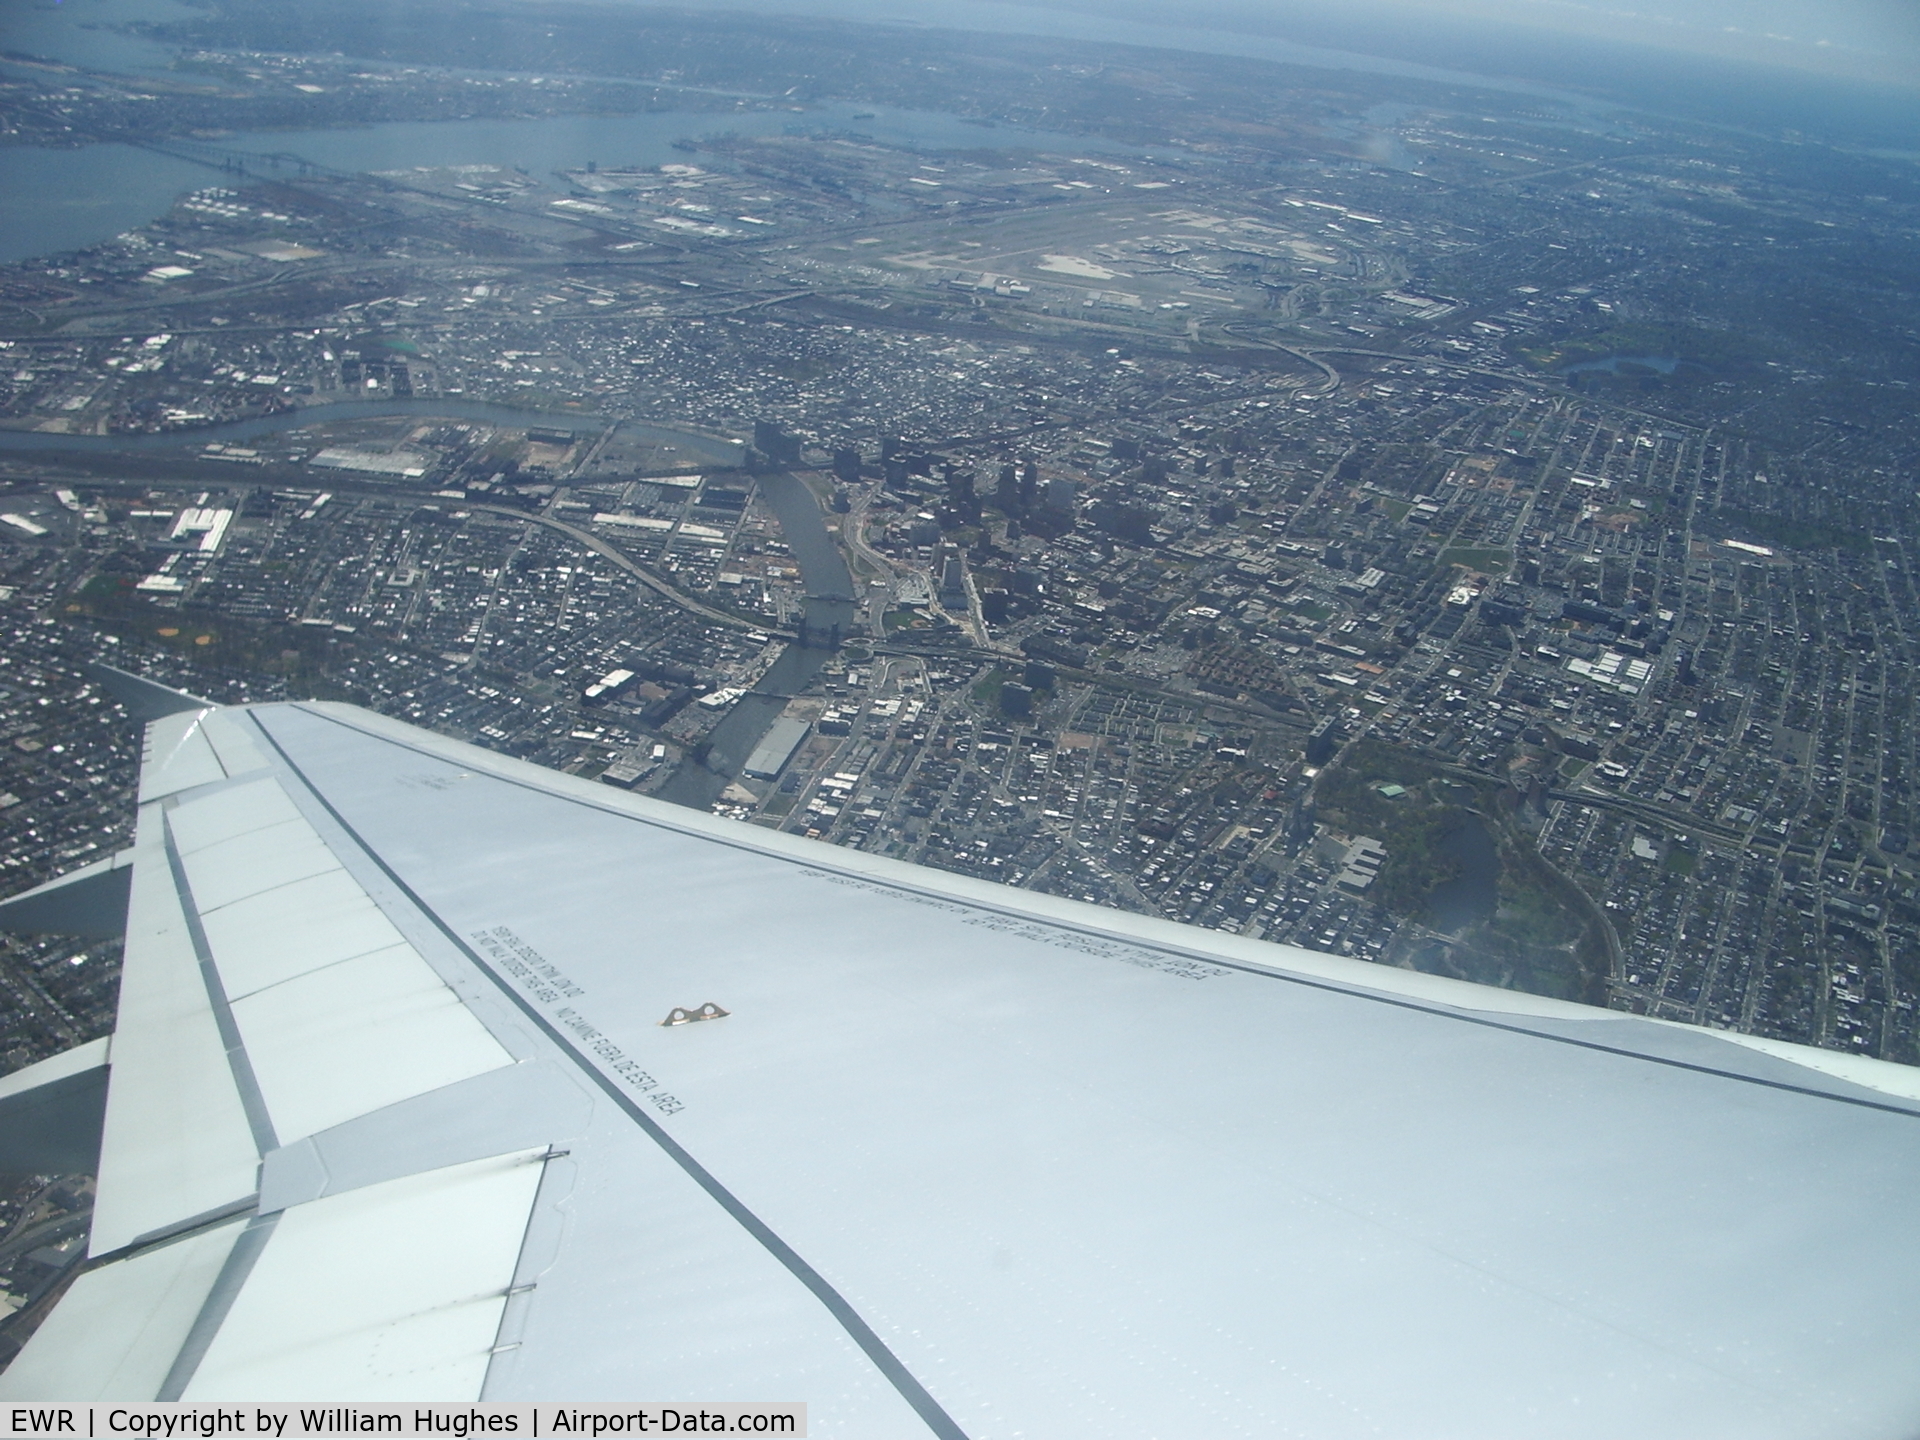 Newark Liberty International Airport (EWR) - after takeoff for Ft Lauderdale